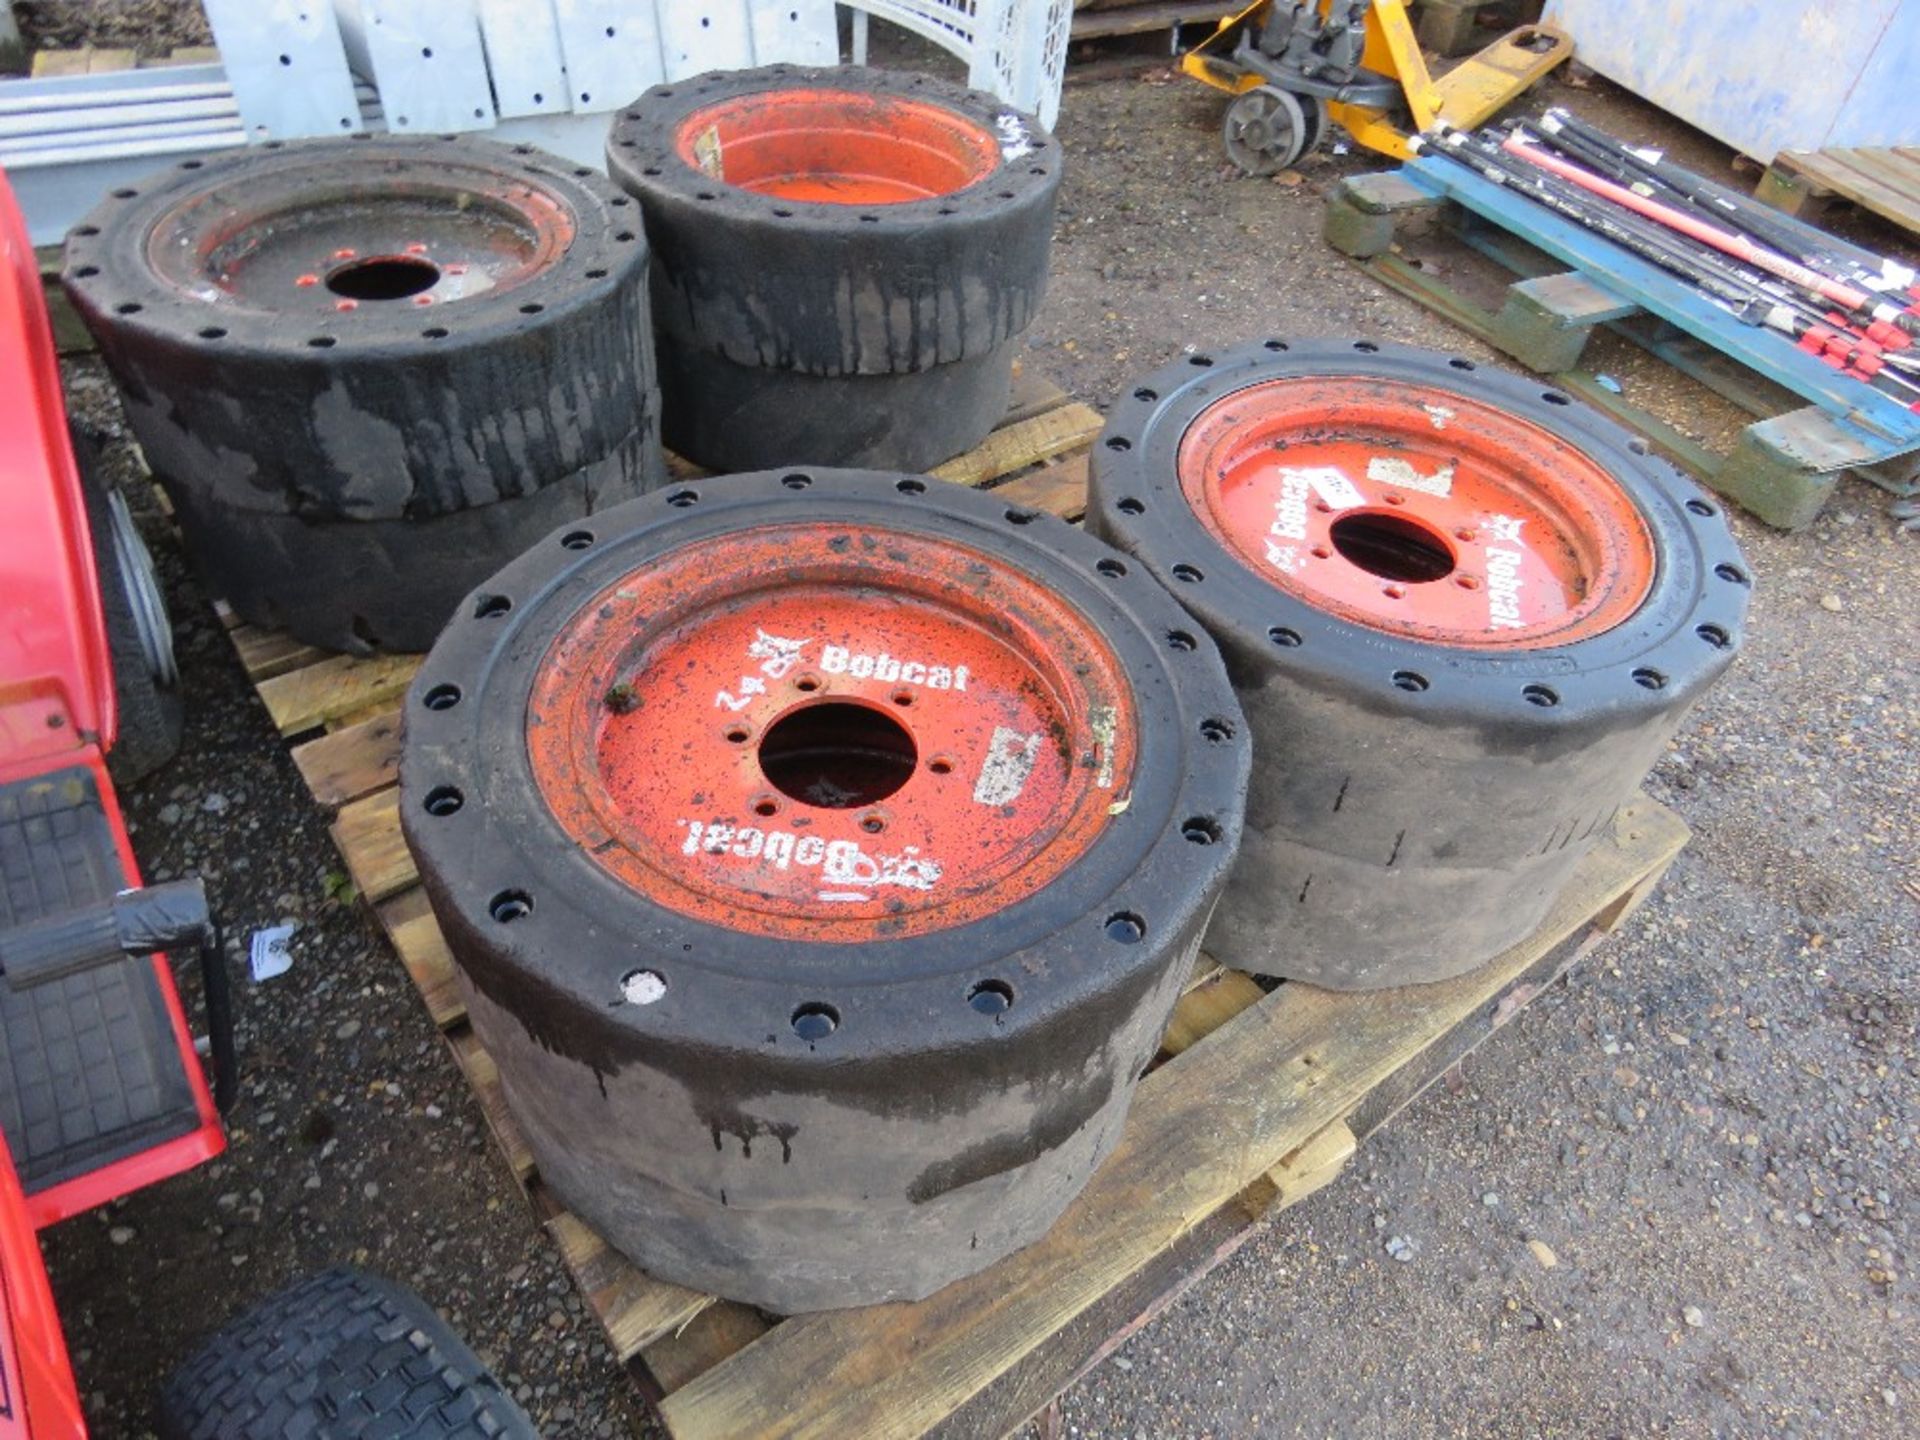 2 X SETS OF 4NO BOBCAT SKID STEER WHEELS AND TYRES, SOLID/AIR CUSHION. - Image 2 of 4